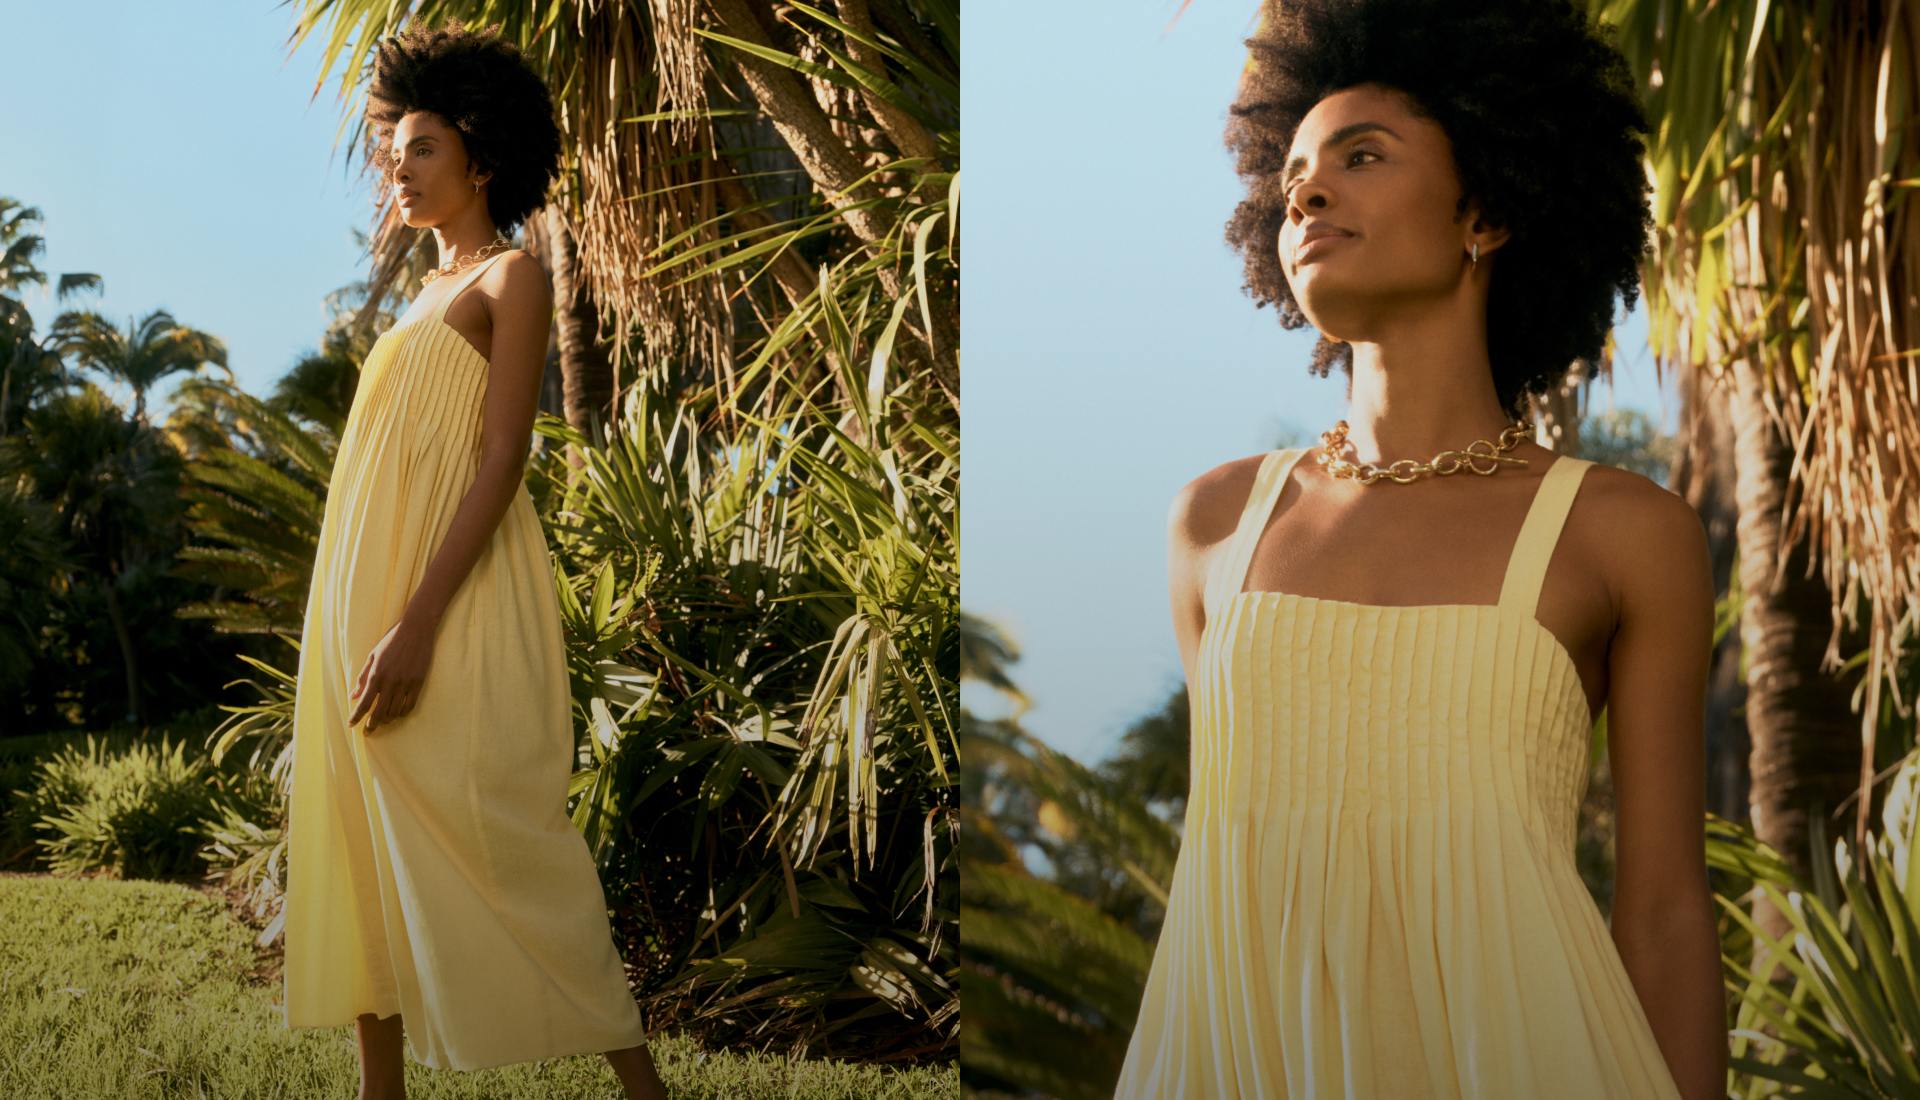 Sunny Season Dresses. Warm days call for light-&-airy designs that feel like a summer’s breeze.